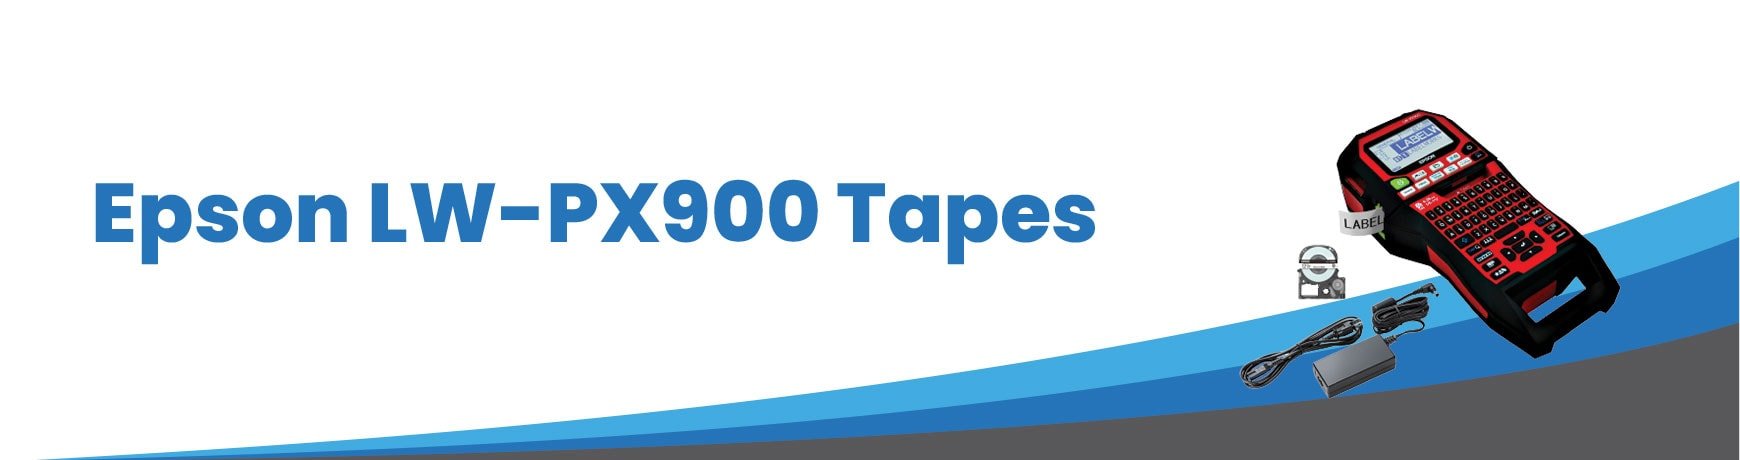 Epson LW-PX900 Tapes